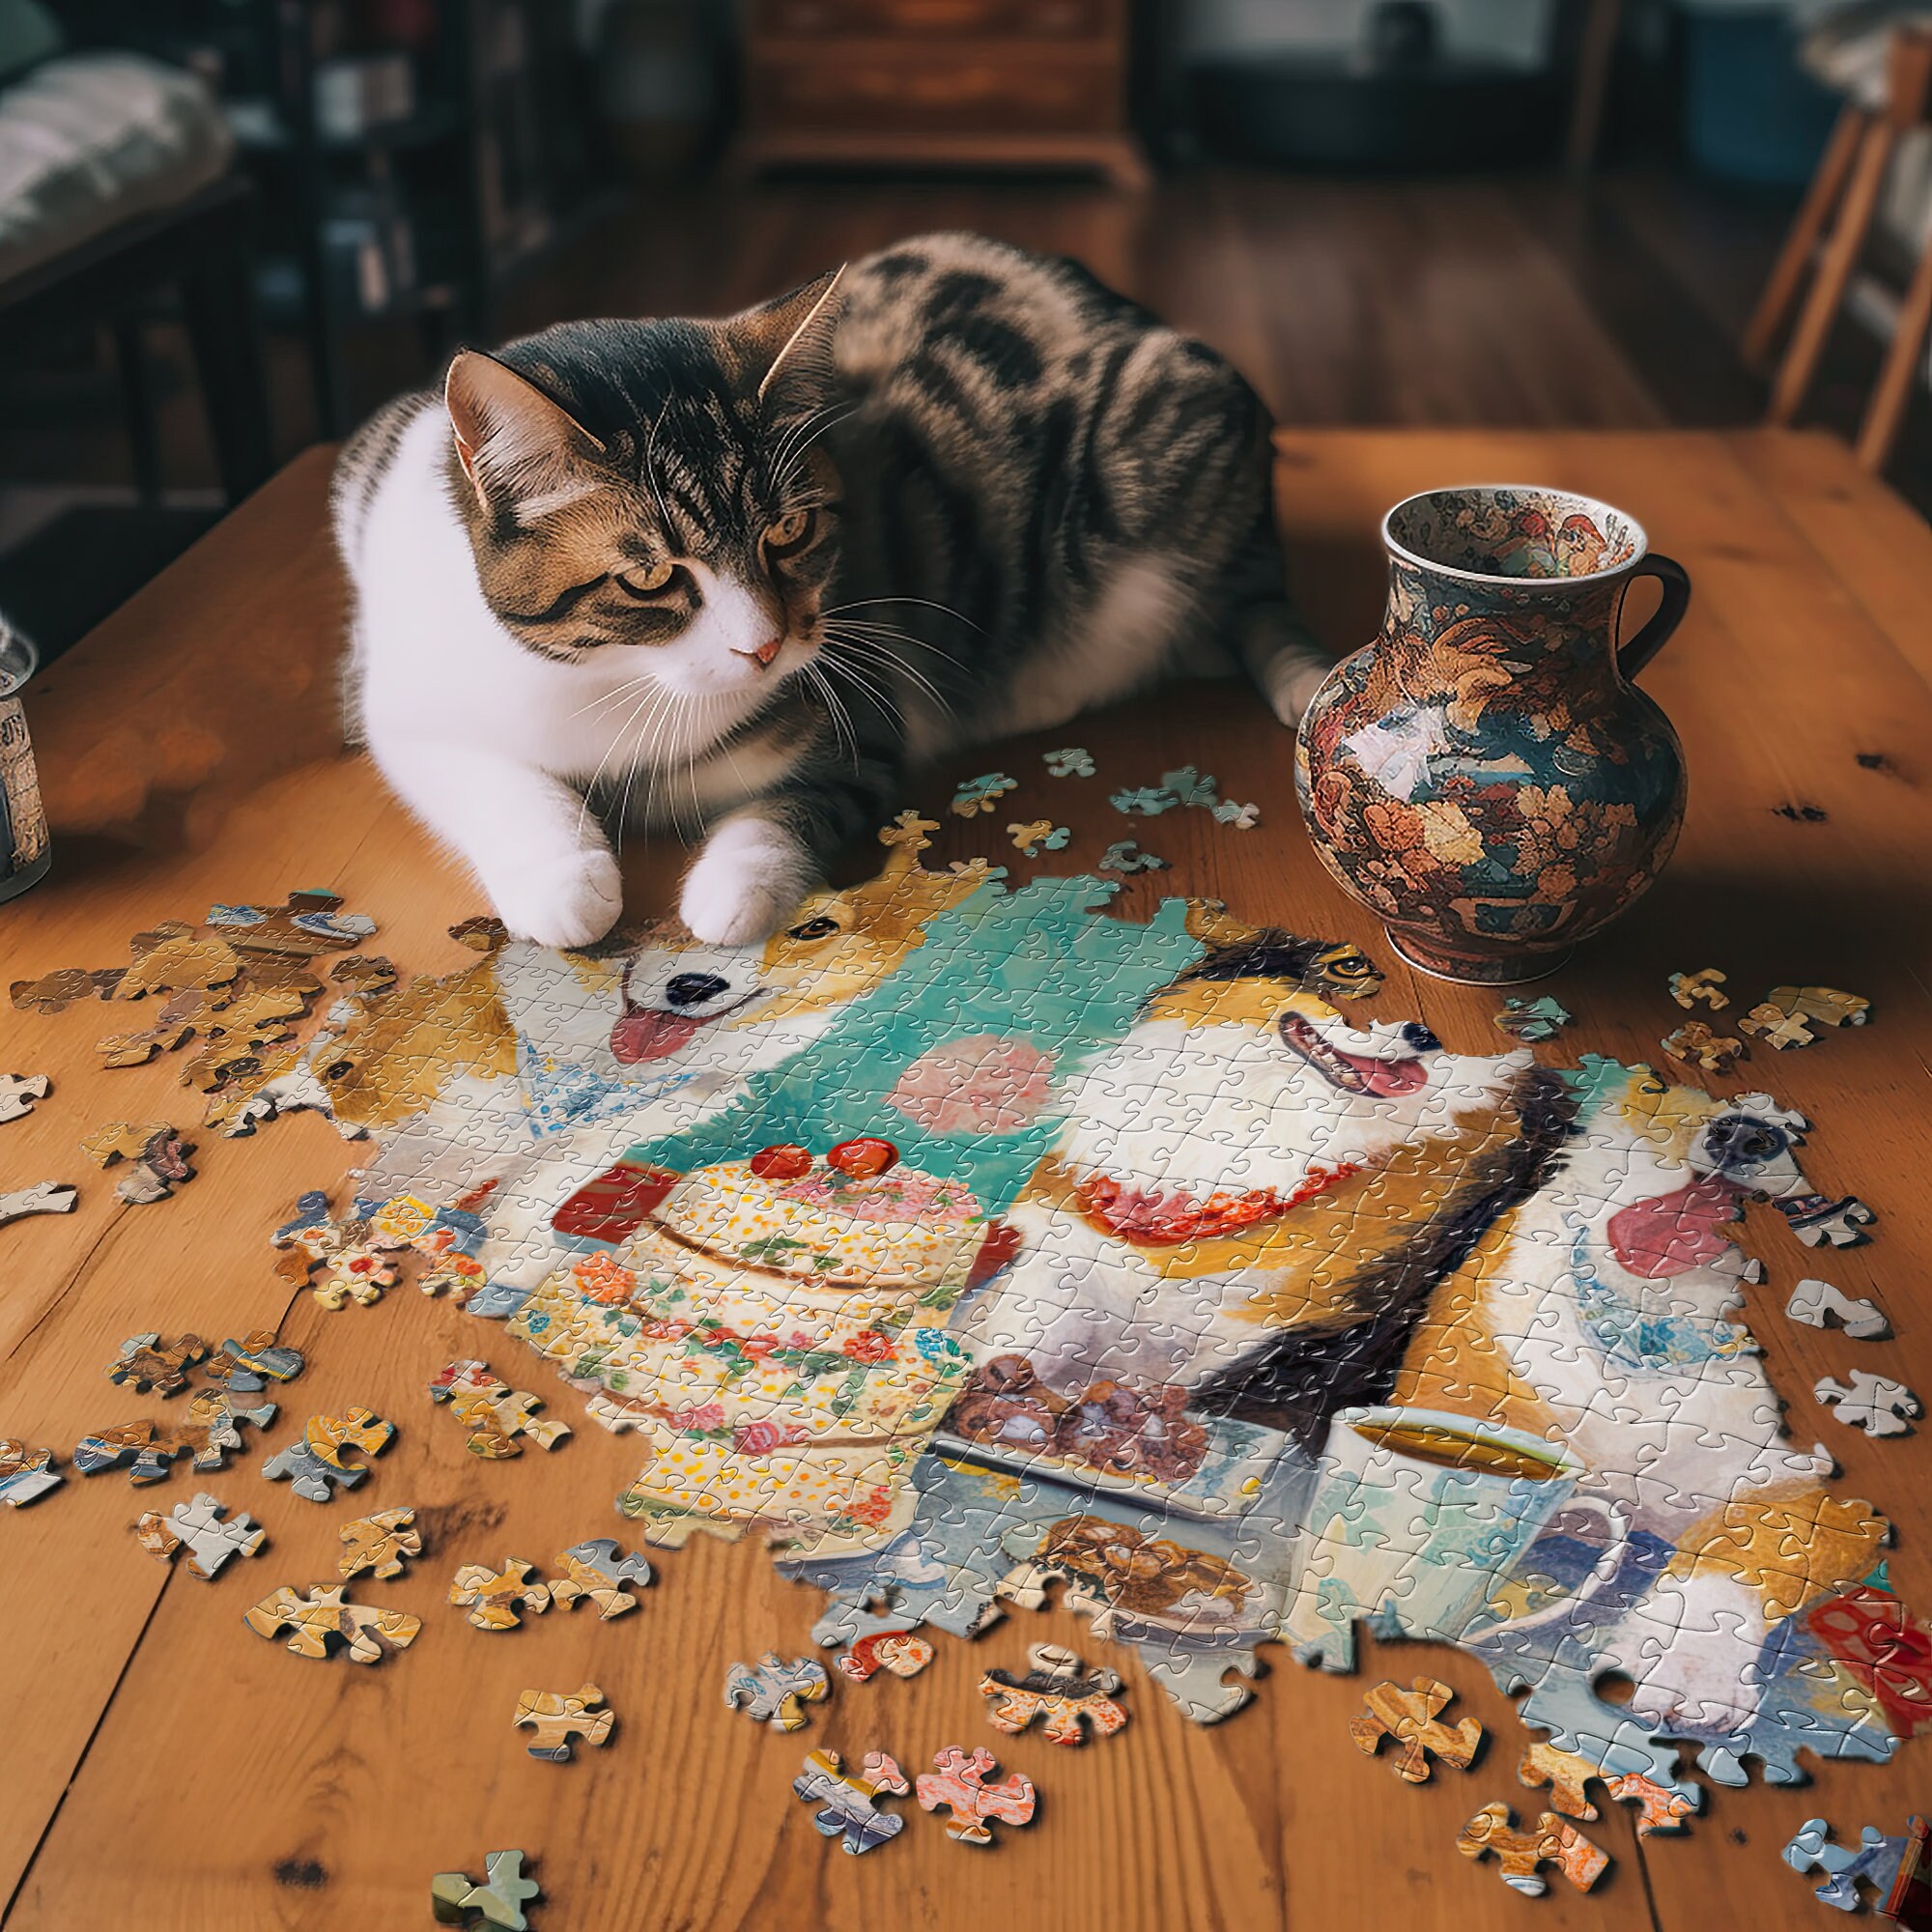  Child Intellectual Jigsaw Corgi, i am Your Friend Corgi Jigsaw  Wooden Puzzles 300 Pieces Art Home Decor DIY Funny Parent-Child Educational  Game Toy Puzzle Gift for Adults and Kids : Toys